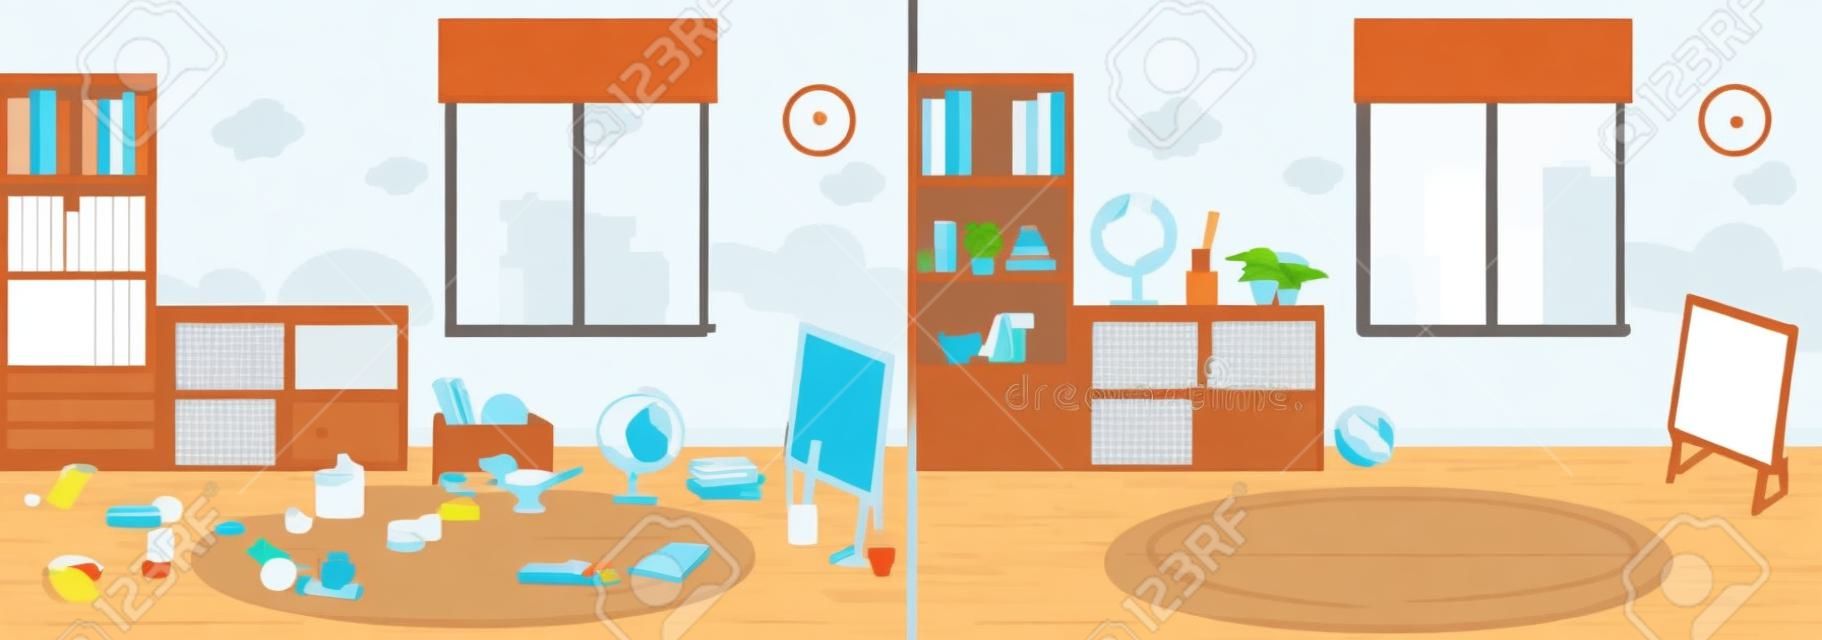 room clean and dirty vector illustration